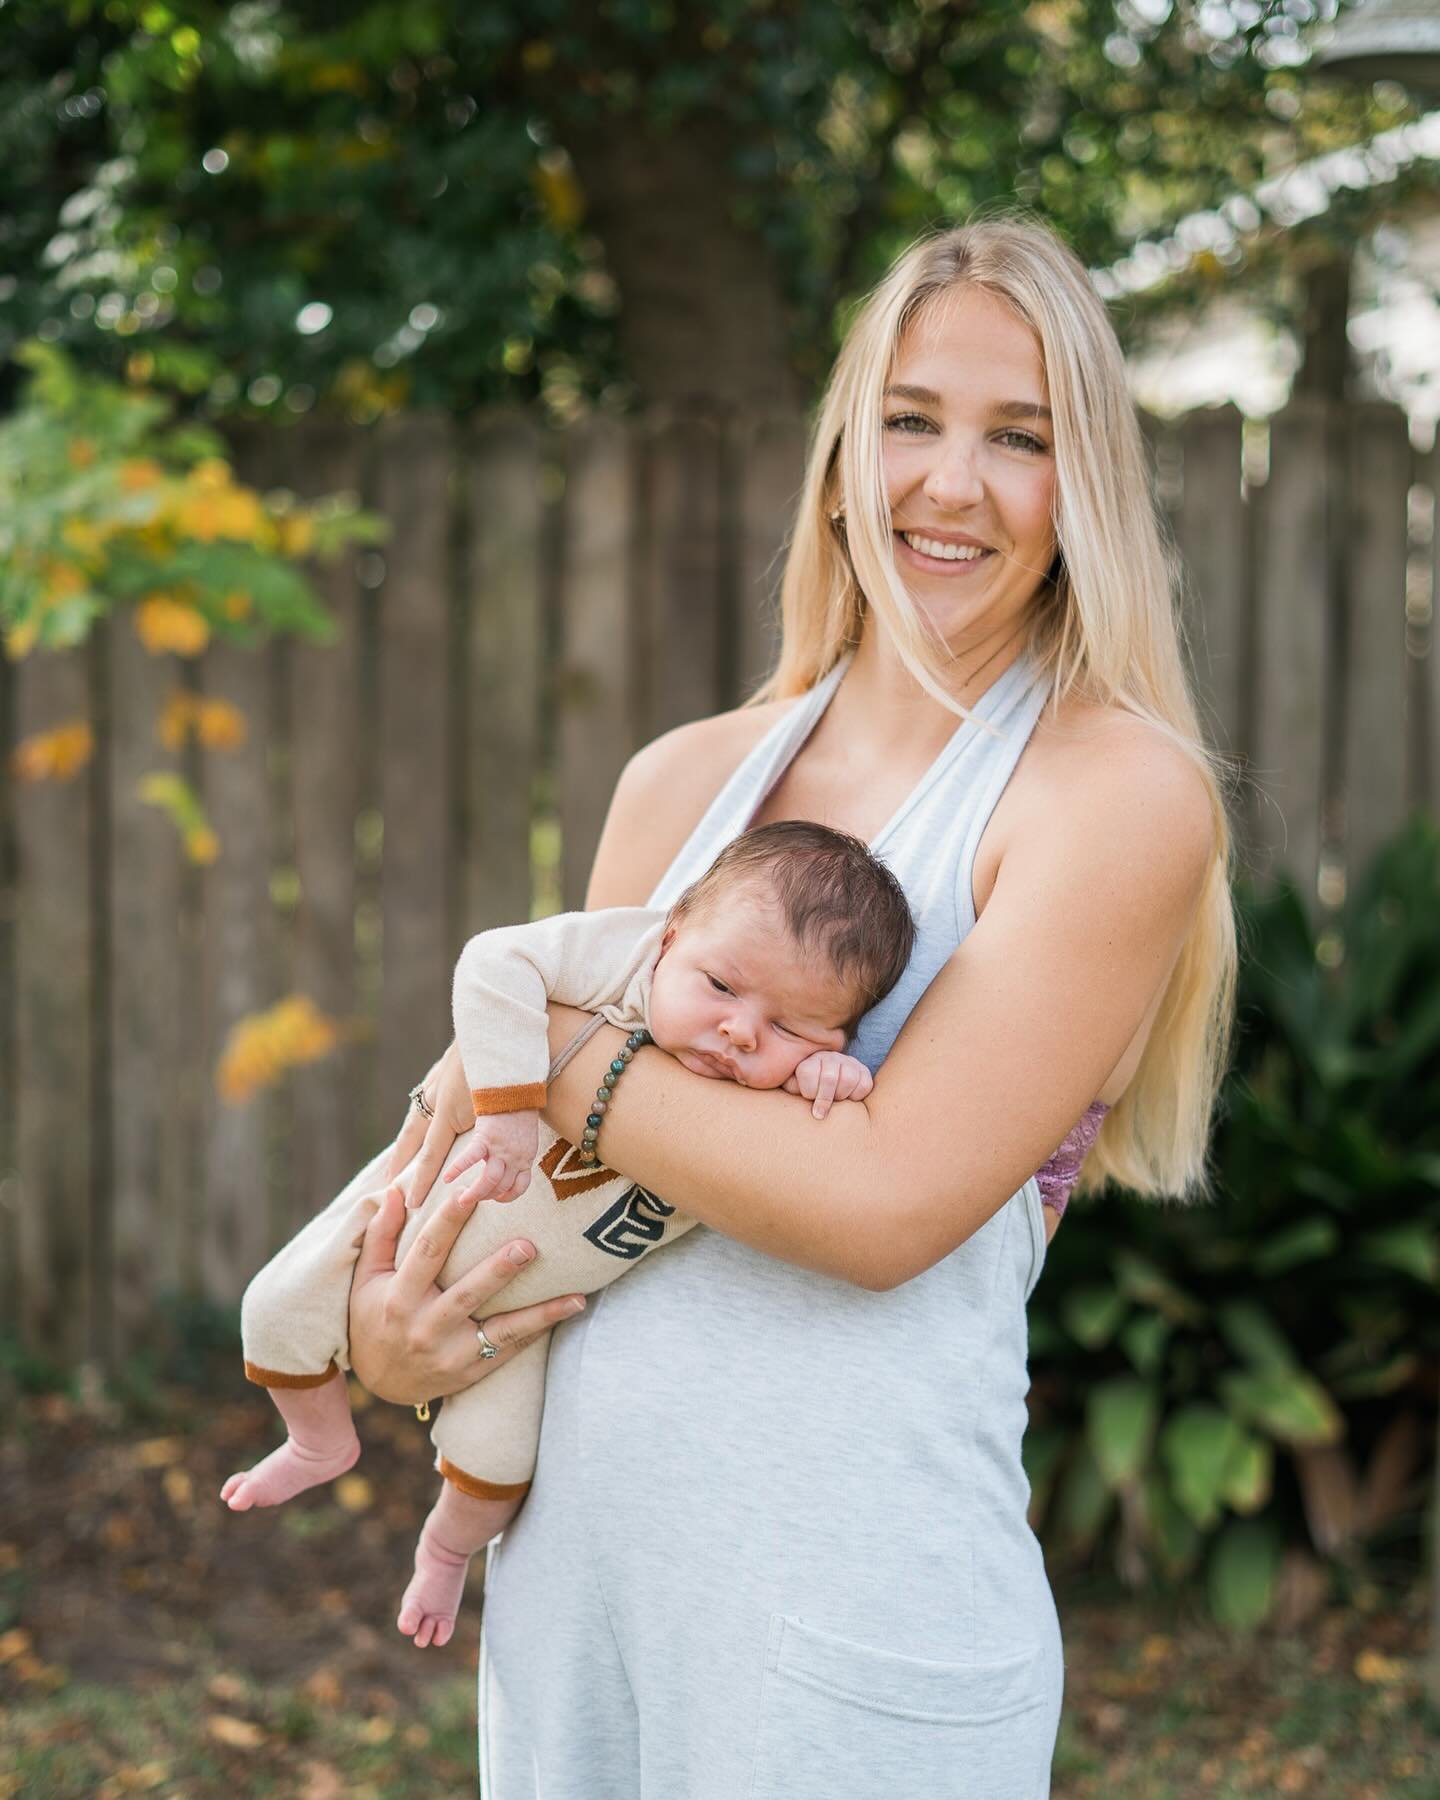 Cheyenna is such a great Mom 🥹&hearts;️

I had the pleasure of being her postpartum doula, photographing Hector as a newborn, and her Motherhood portraits!

I can&rsquo;t wait to share the photos from our studio soon! 
But in the meantime, let&rsquo